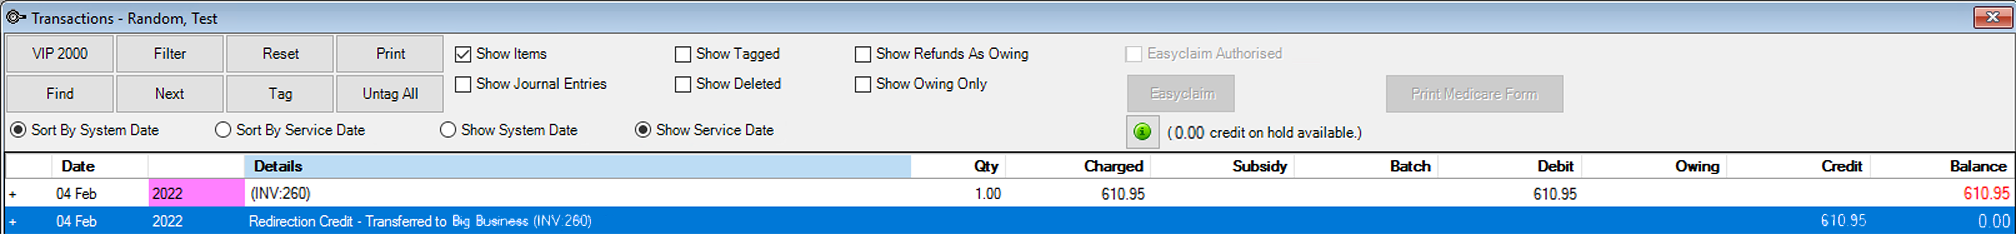 Correcting redirected Overpayments with no gap